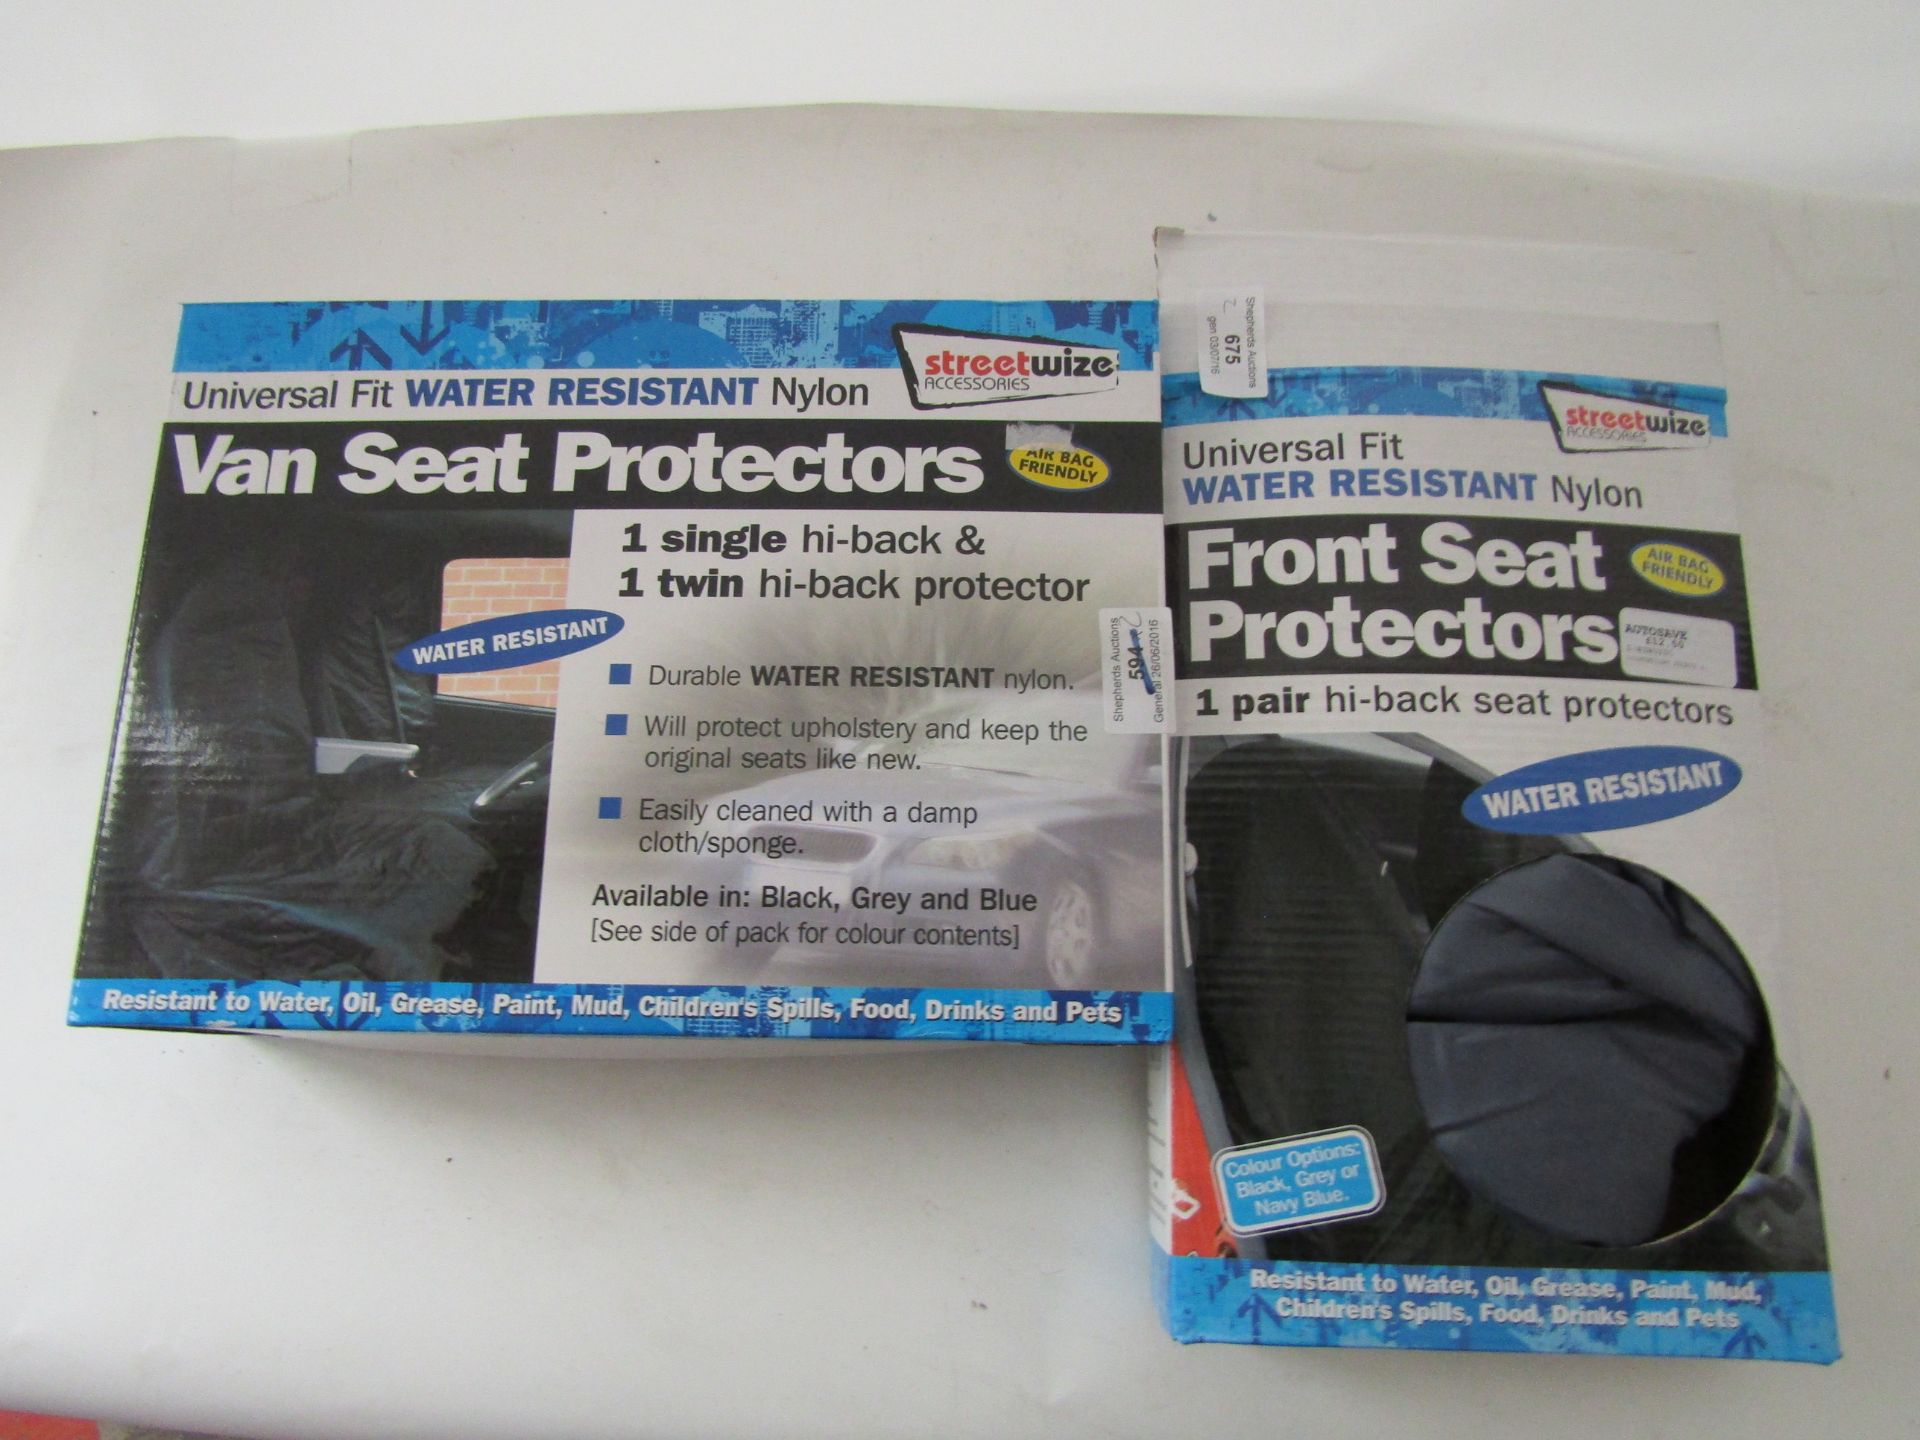 1x Streetwize Universal Fit Water Resistant Nylon Front Seat Protectors & 1x Streetwize Water